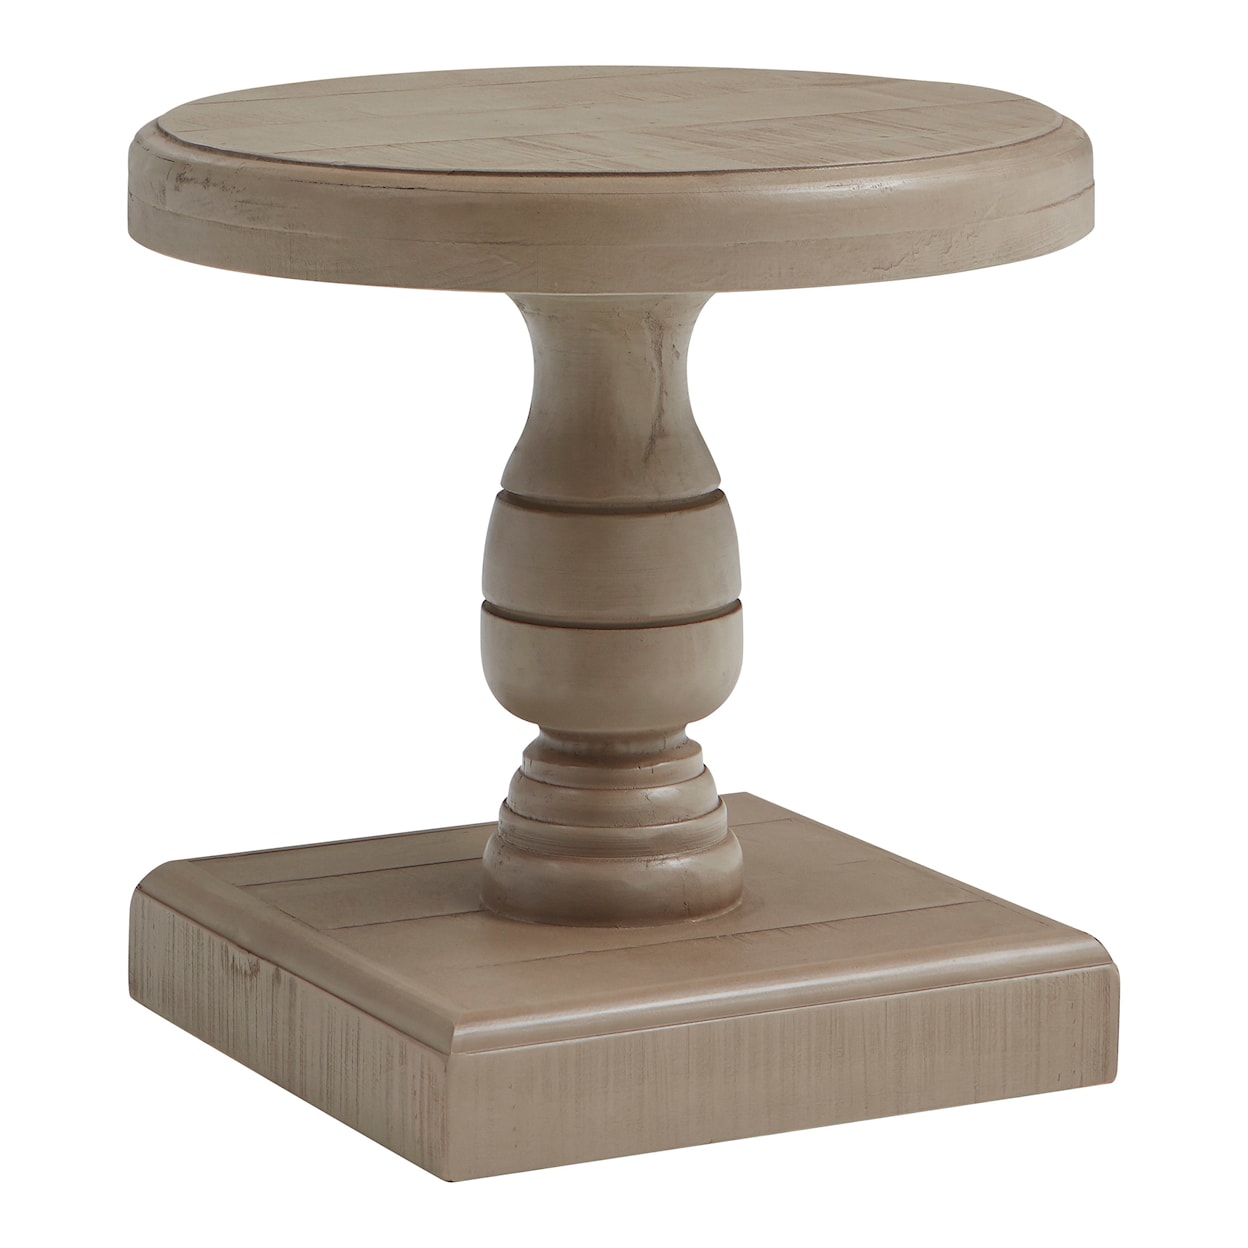 Aspenhome Hermosa Round End Table